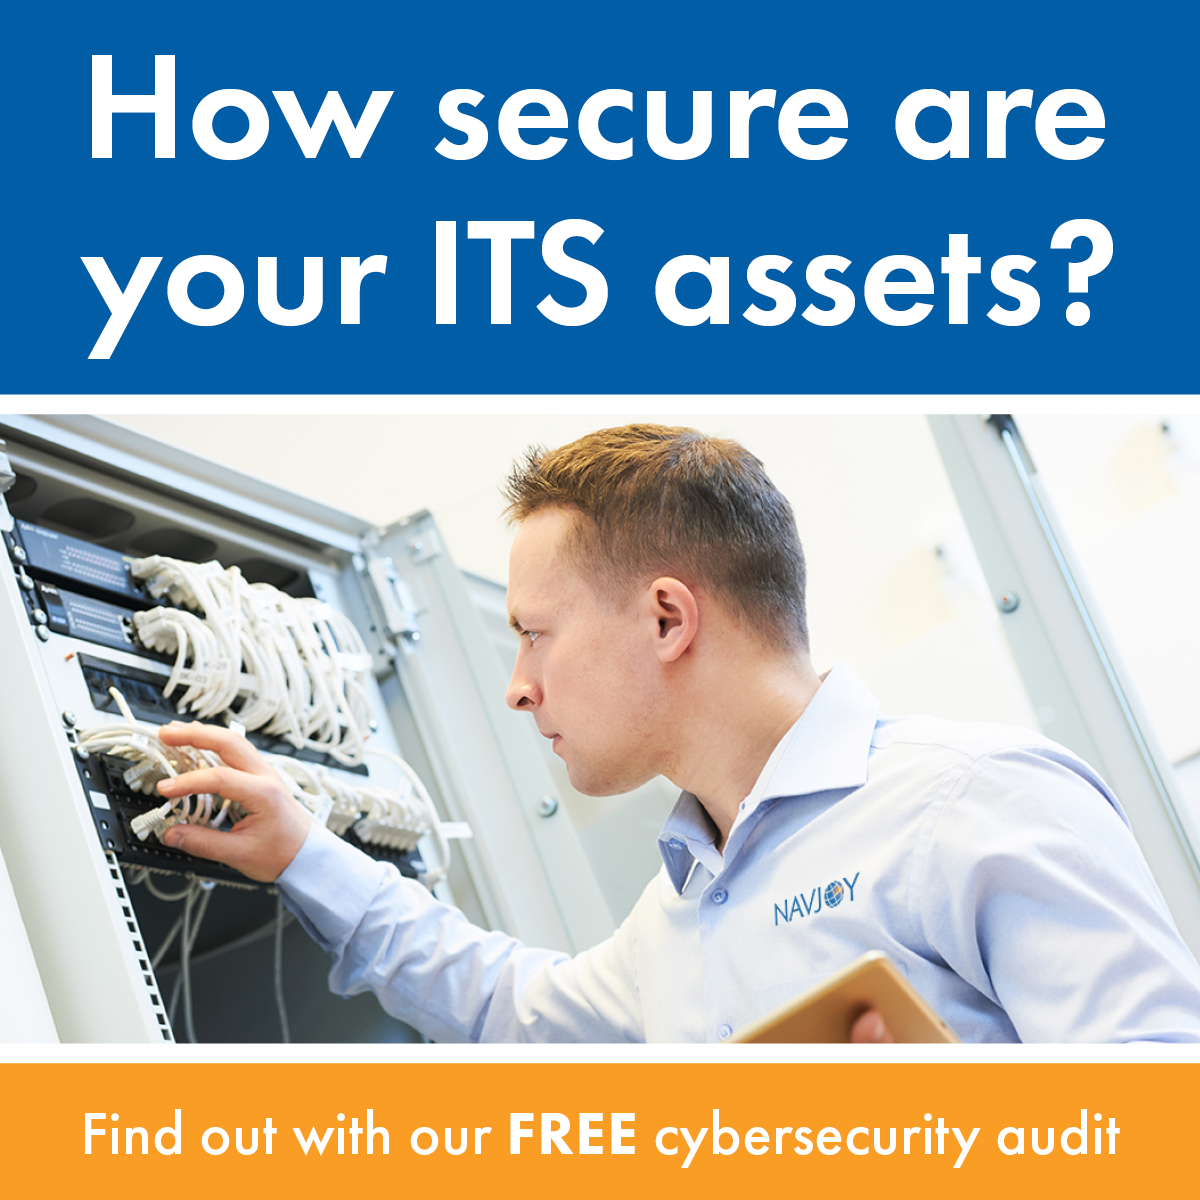 Click here to receive a free cybersecurity audit